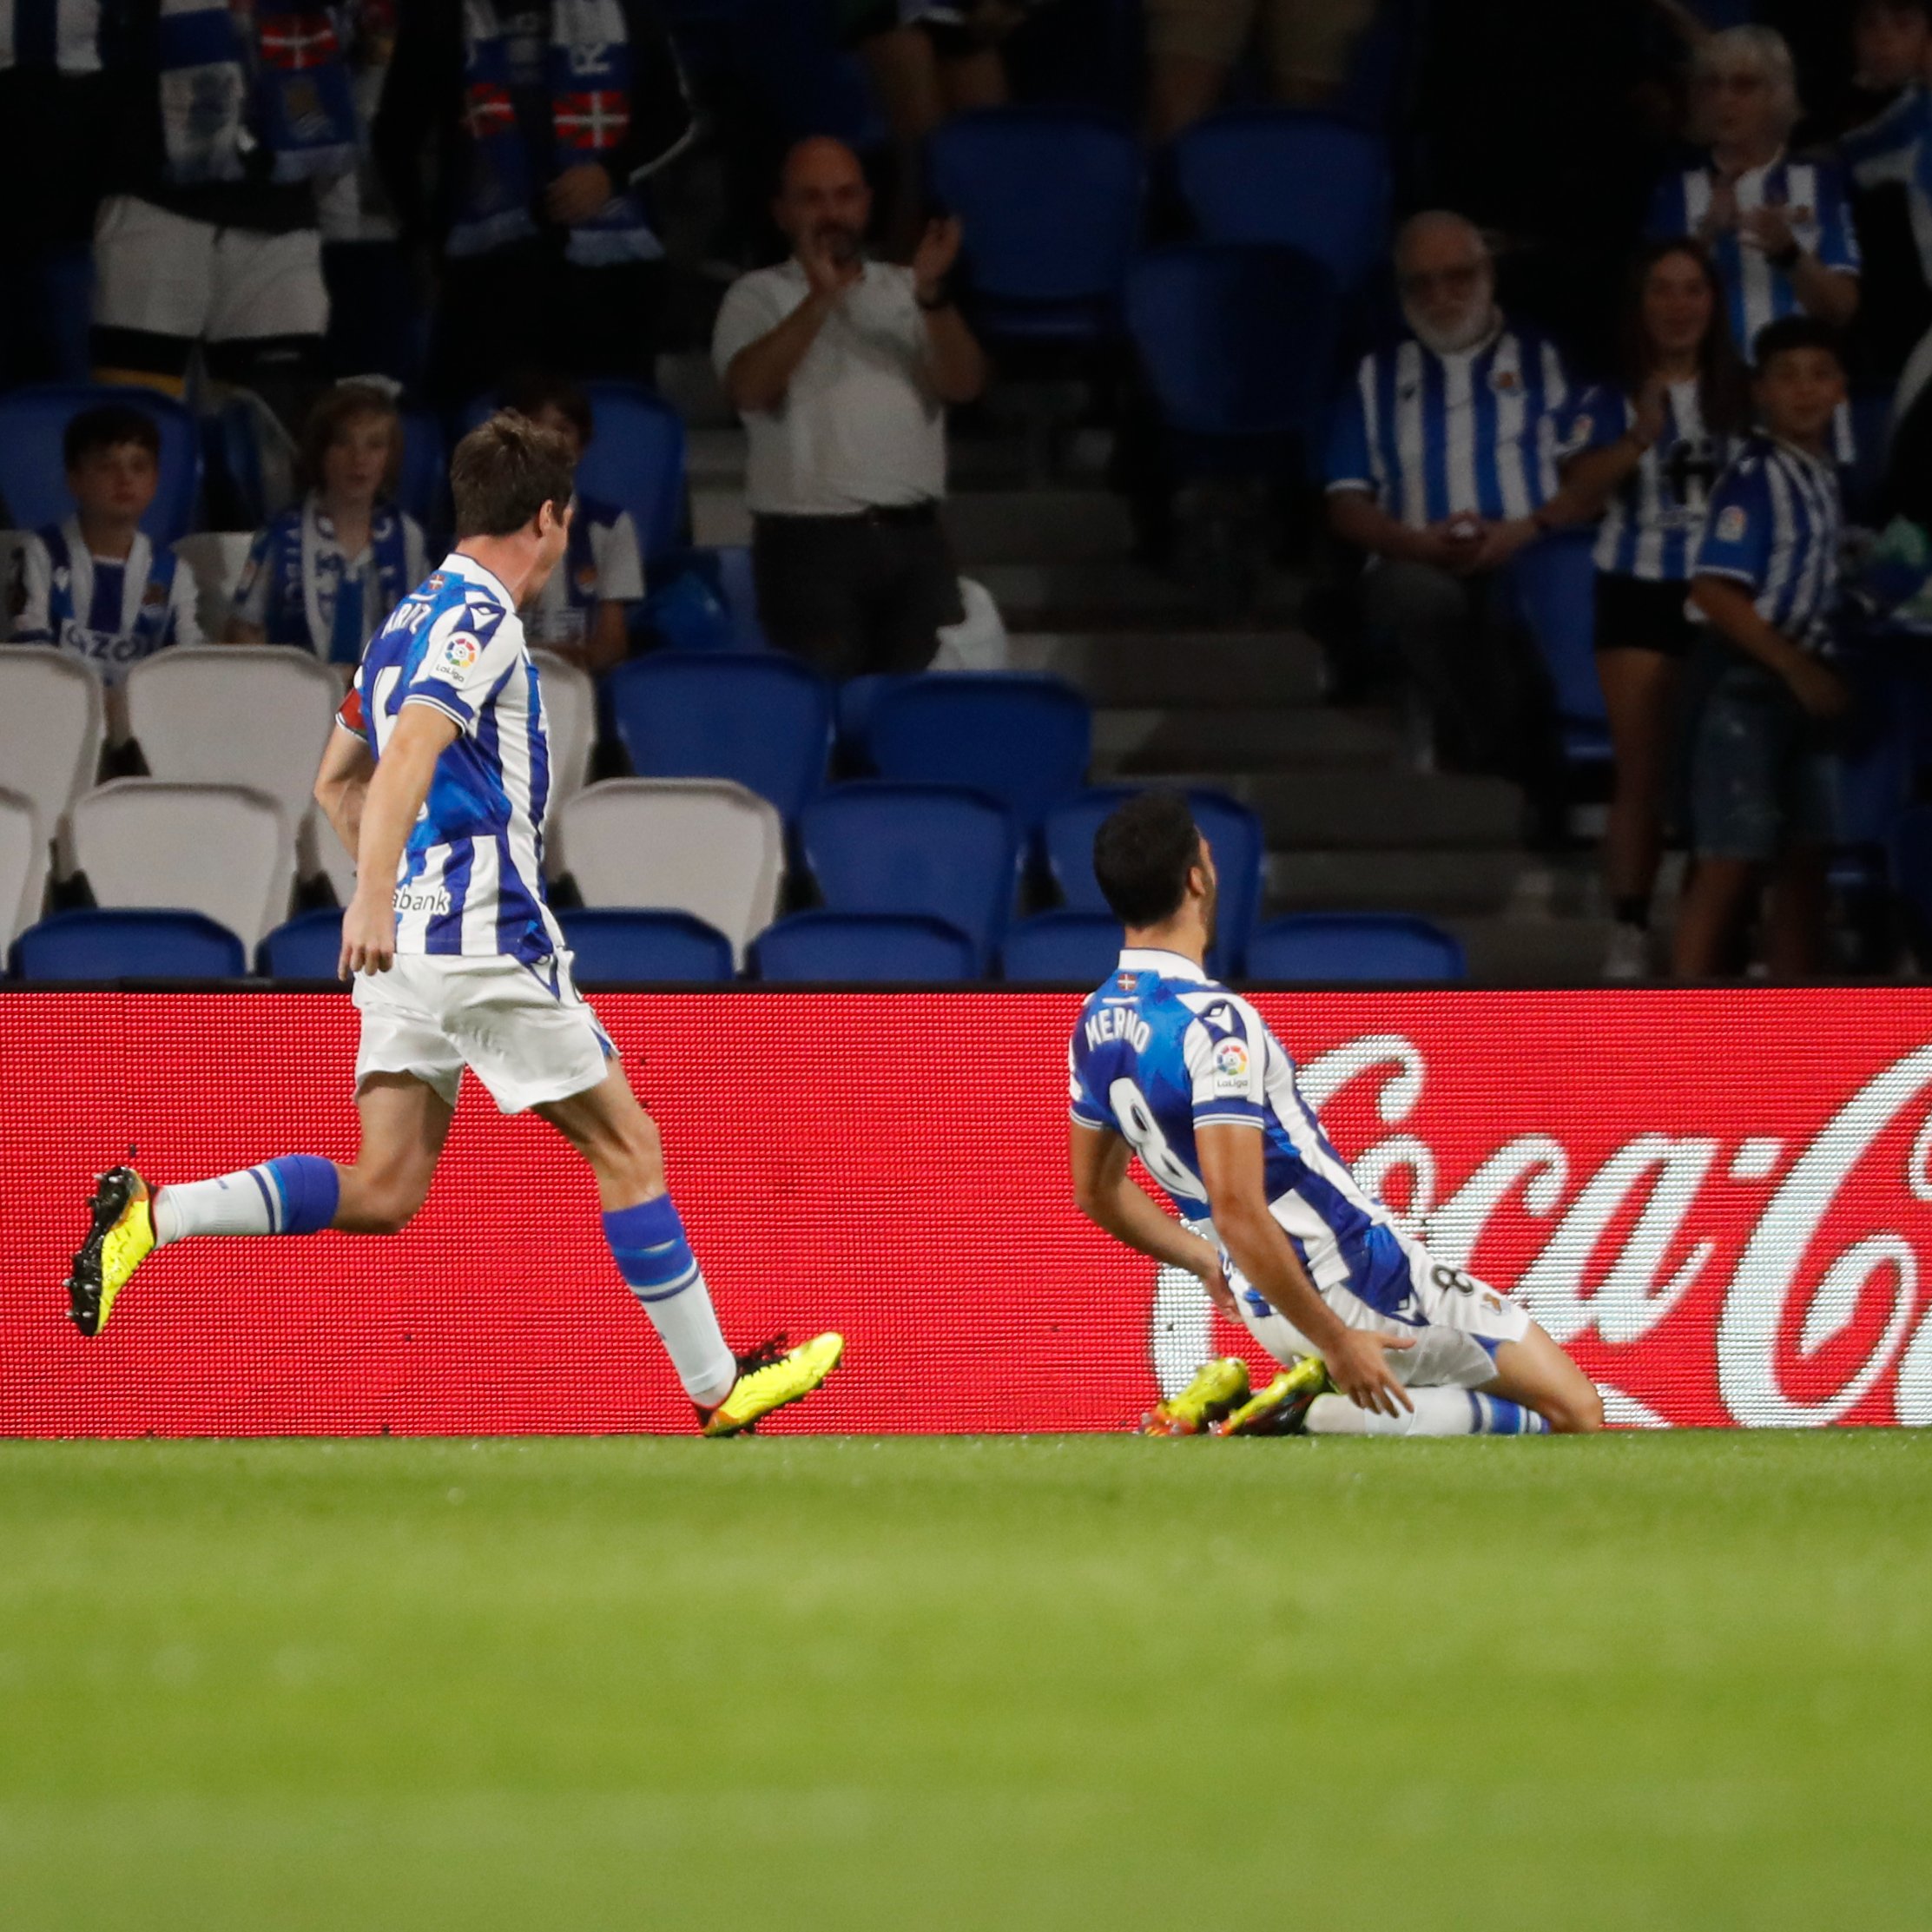 ‘I made the best decision of my career signing for La Real’ – Spain star delighted at Real Sociedad